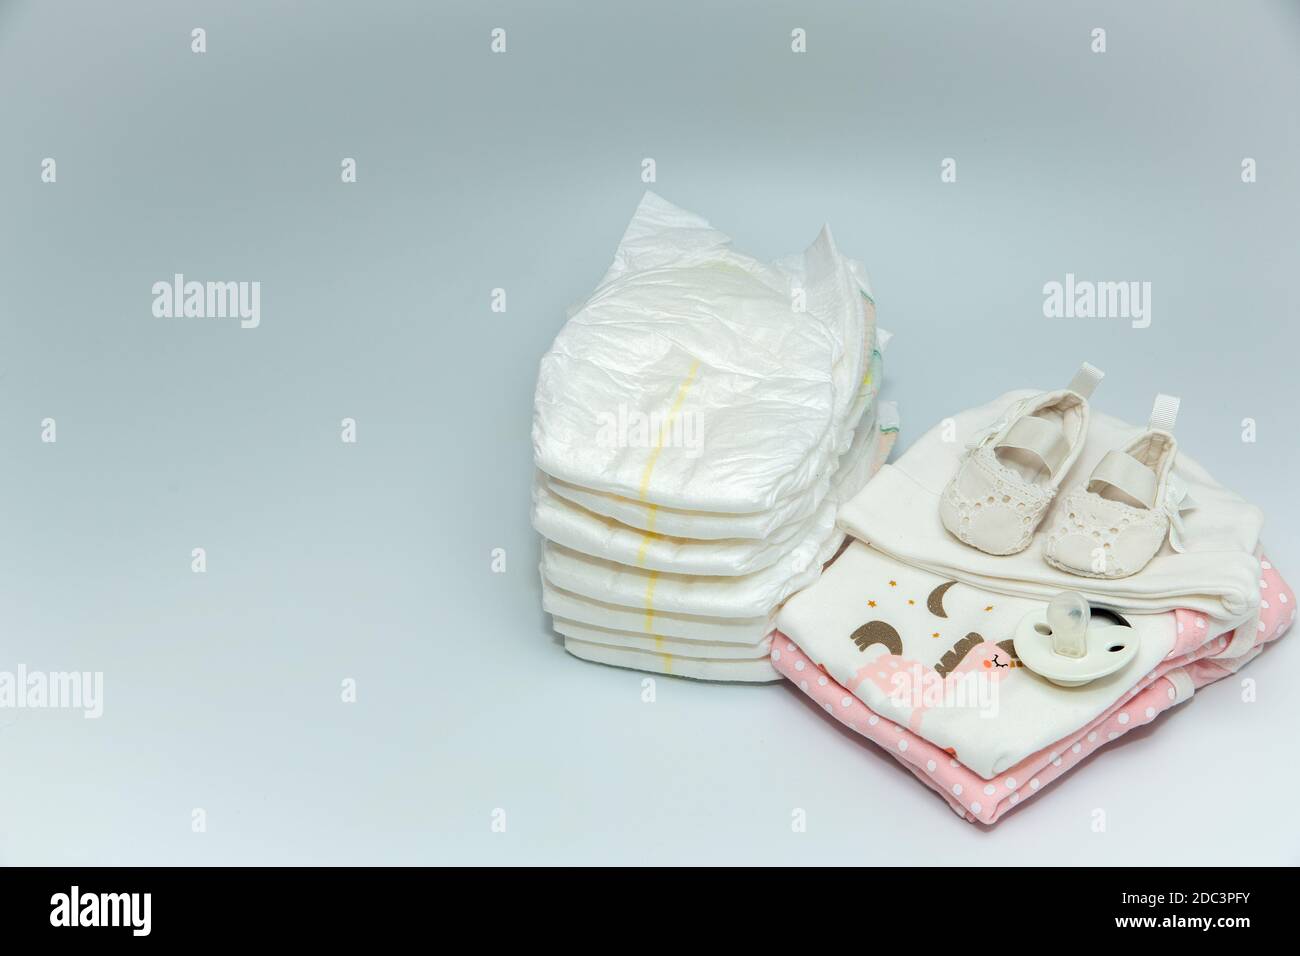 A pile of baby clothes and accessories. Stock Photo